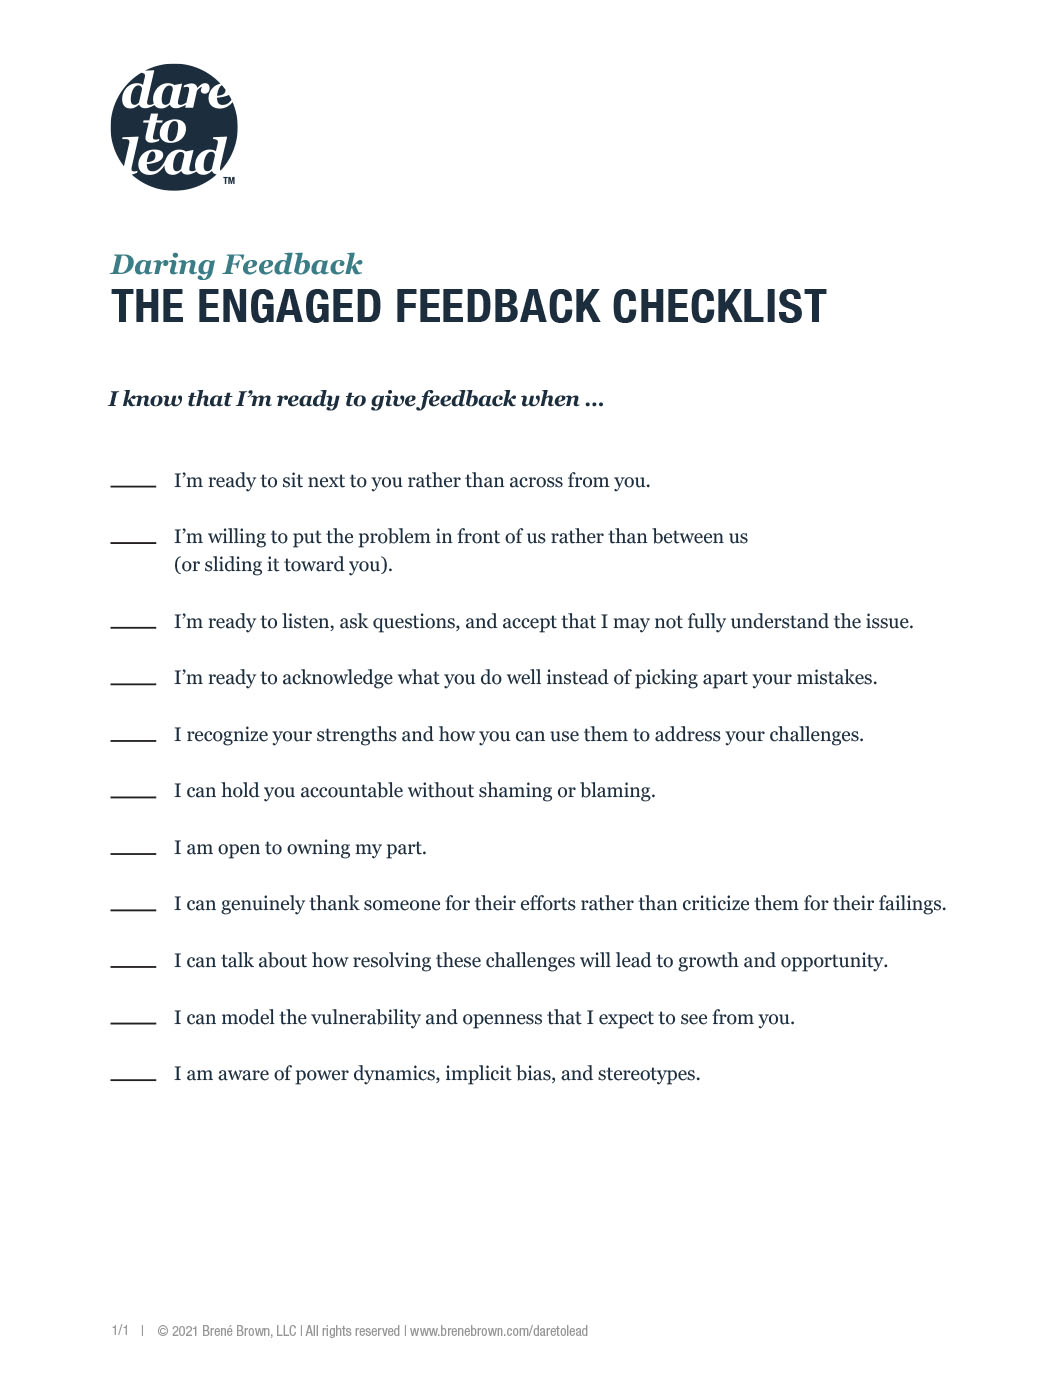 Dare to Lead The Engaged Feedback Checklist